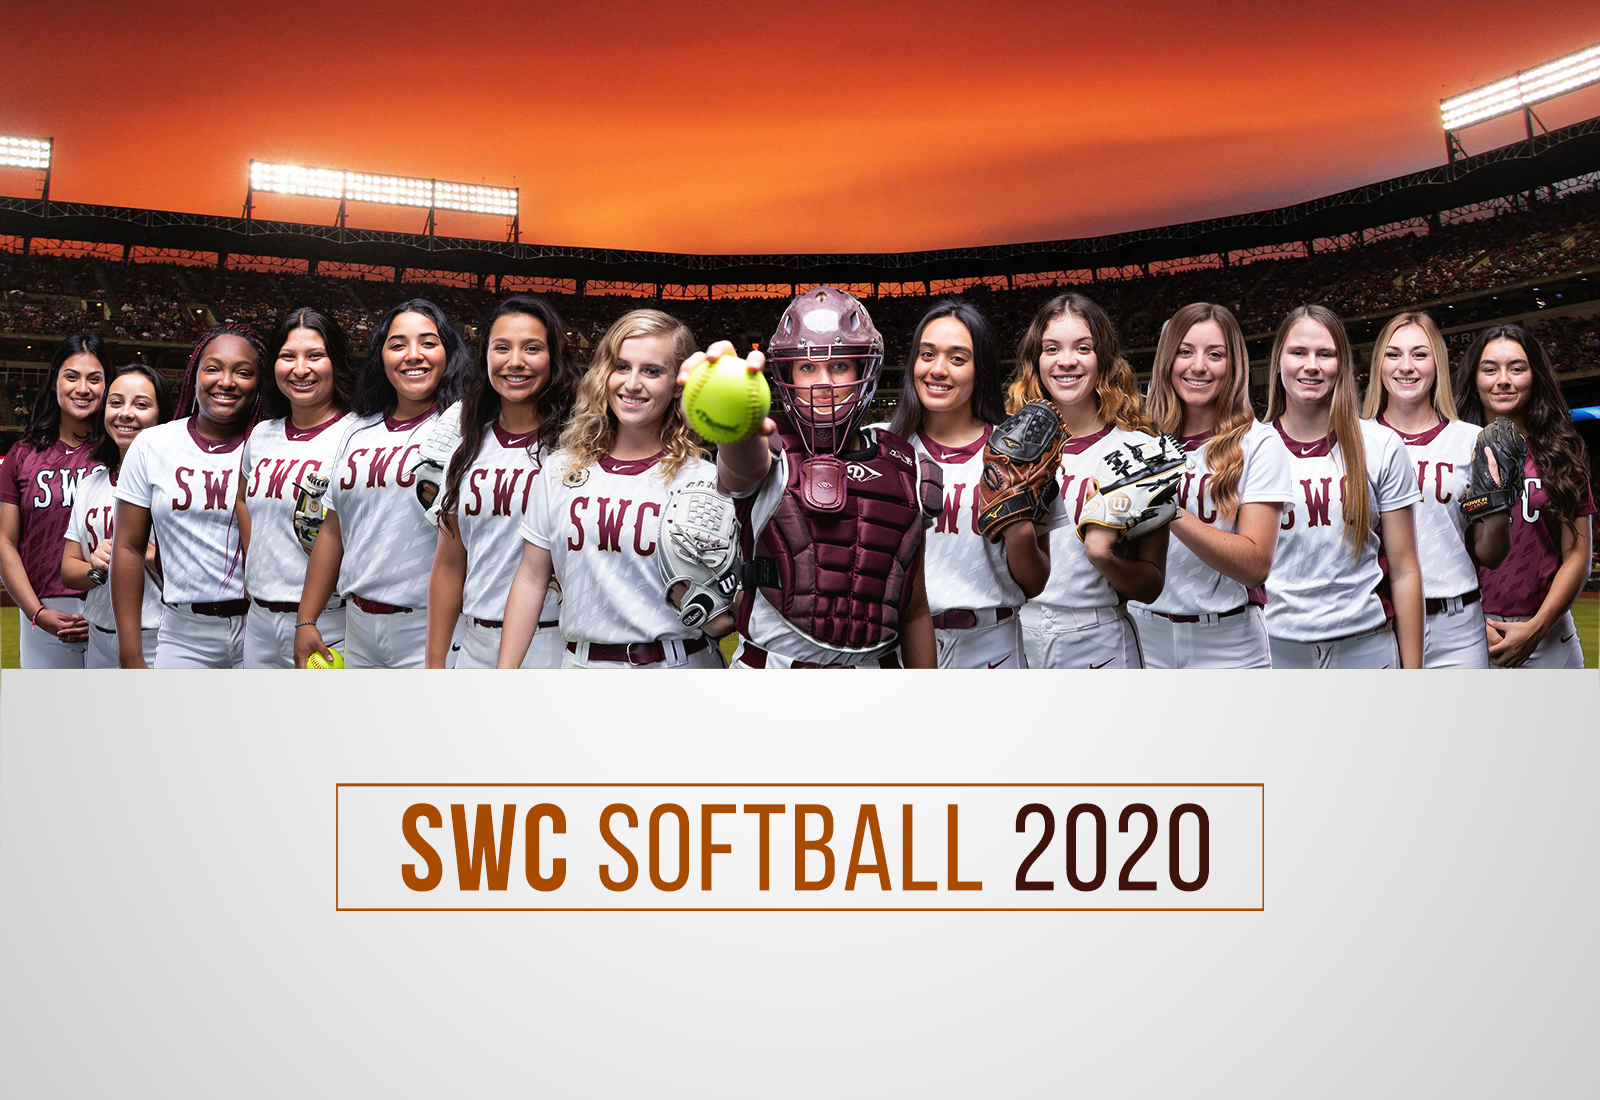 #11 Southwestern Softball successful 2020 season ended abruptly by COVID-19